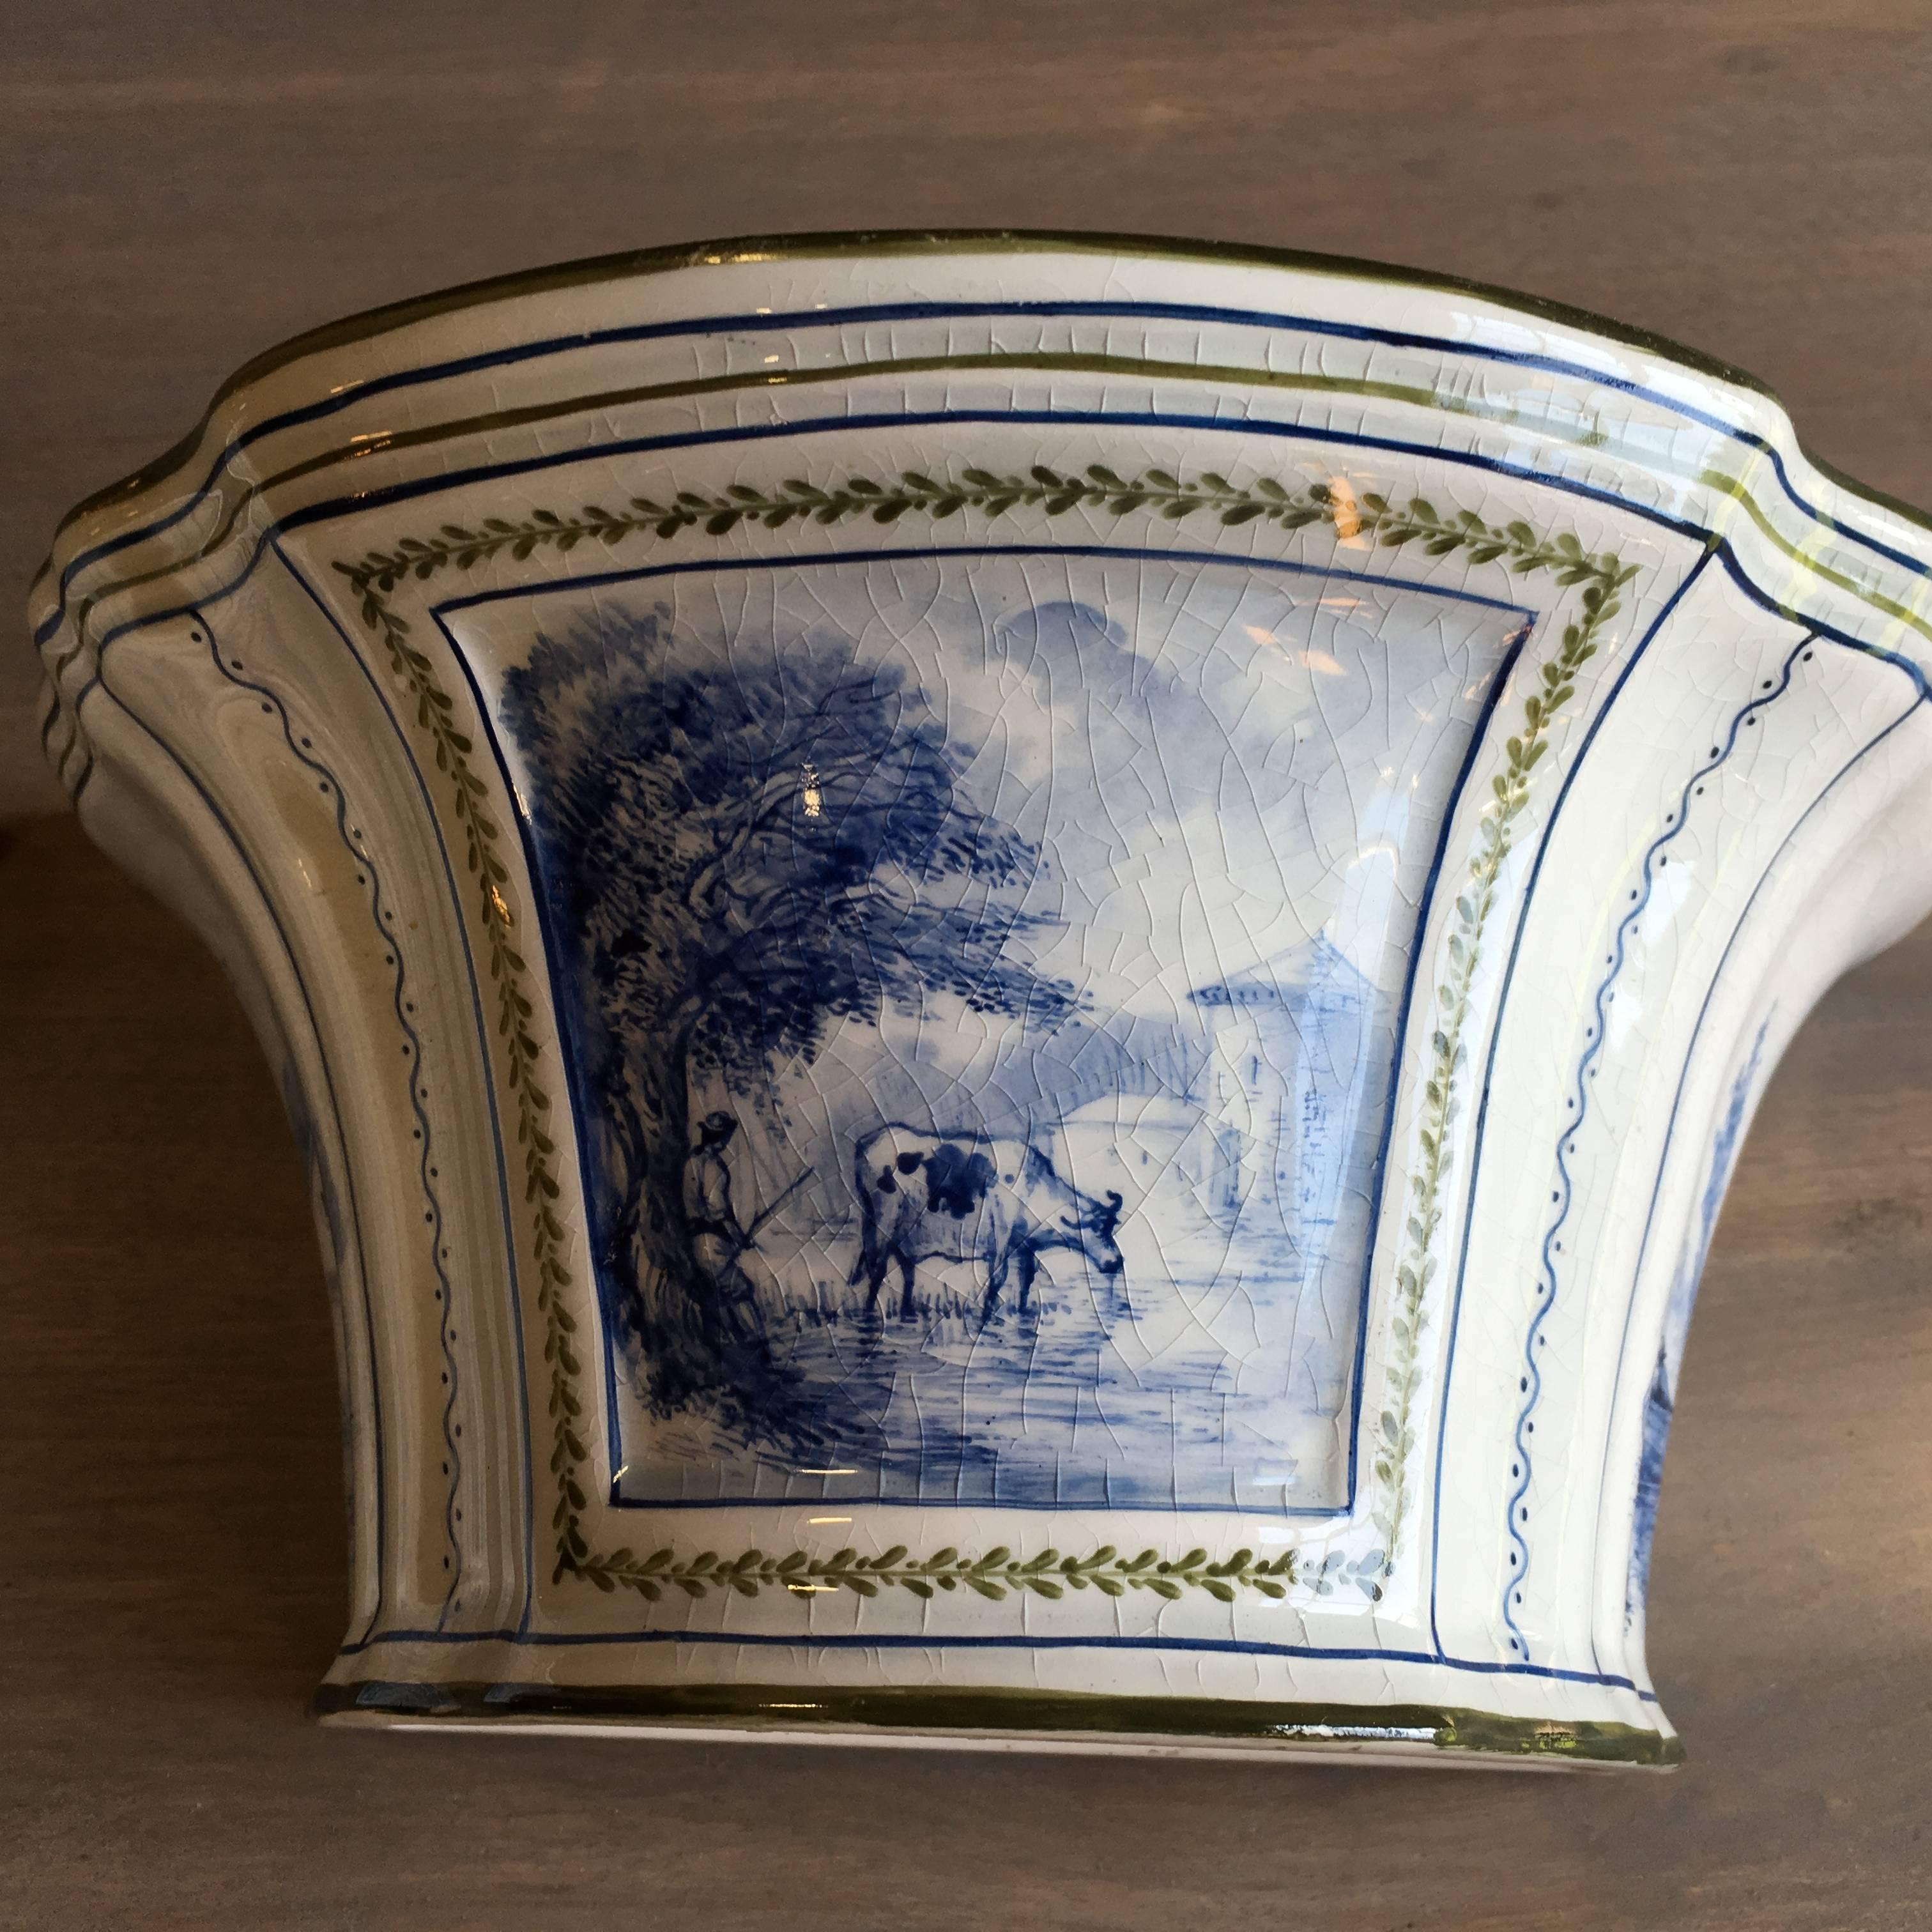 A fine pair of French flower holders (bouquetieres) in porcelain by Rovina Epinal, the noted factory in the St. Clement region, with pastoral scenes in blue on a cream white background, circa 1870.